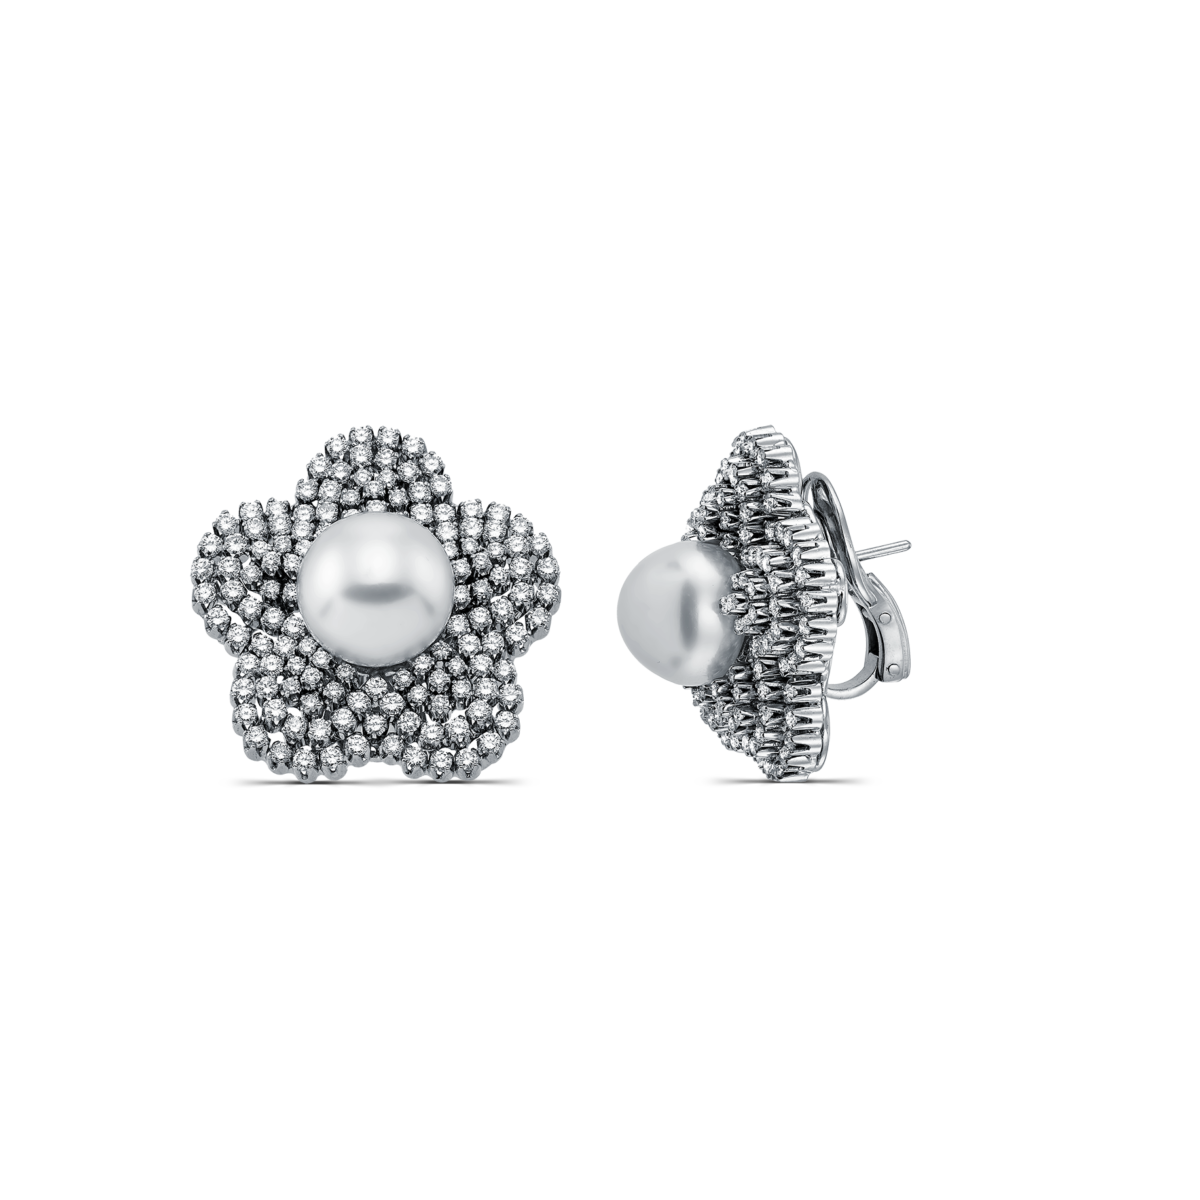 Magnificent Diamonds and Pearl Earring in White Gold